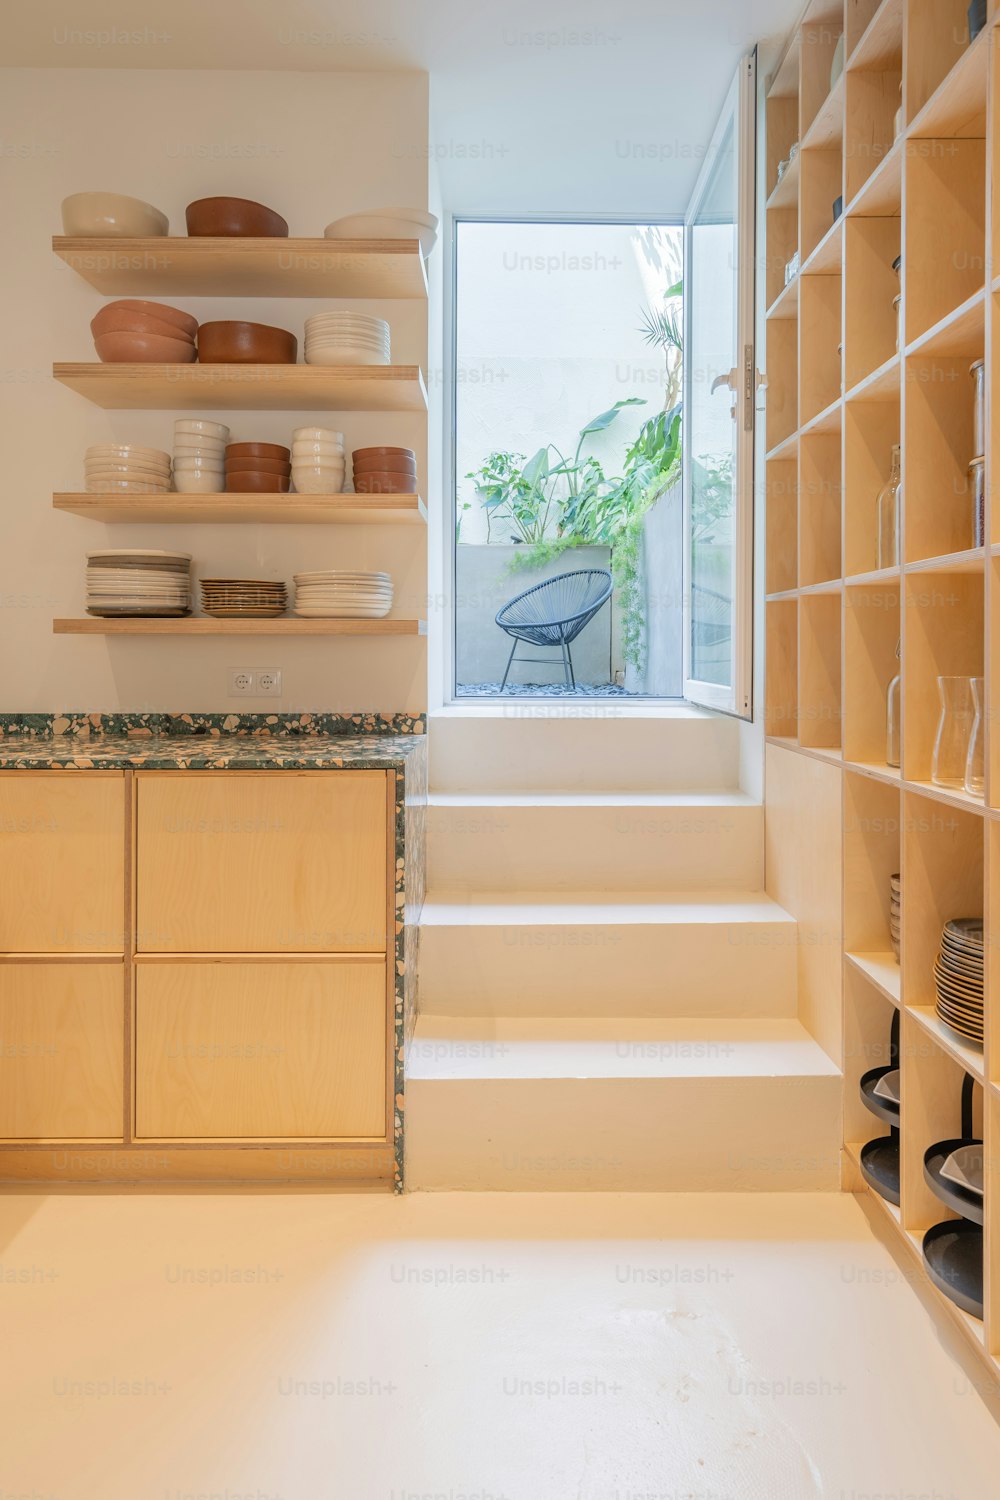 a kitchen with a window and shelves filled with dishes